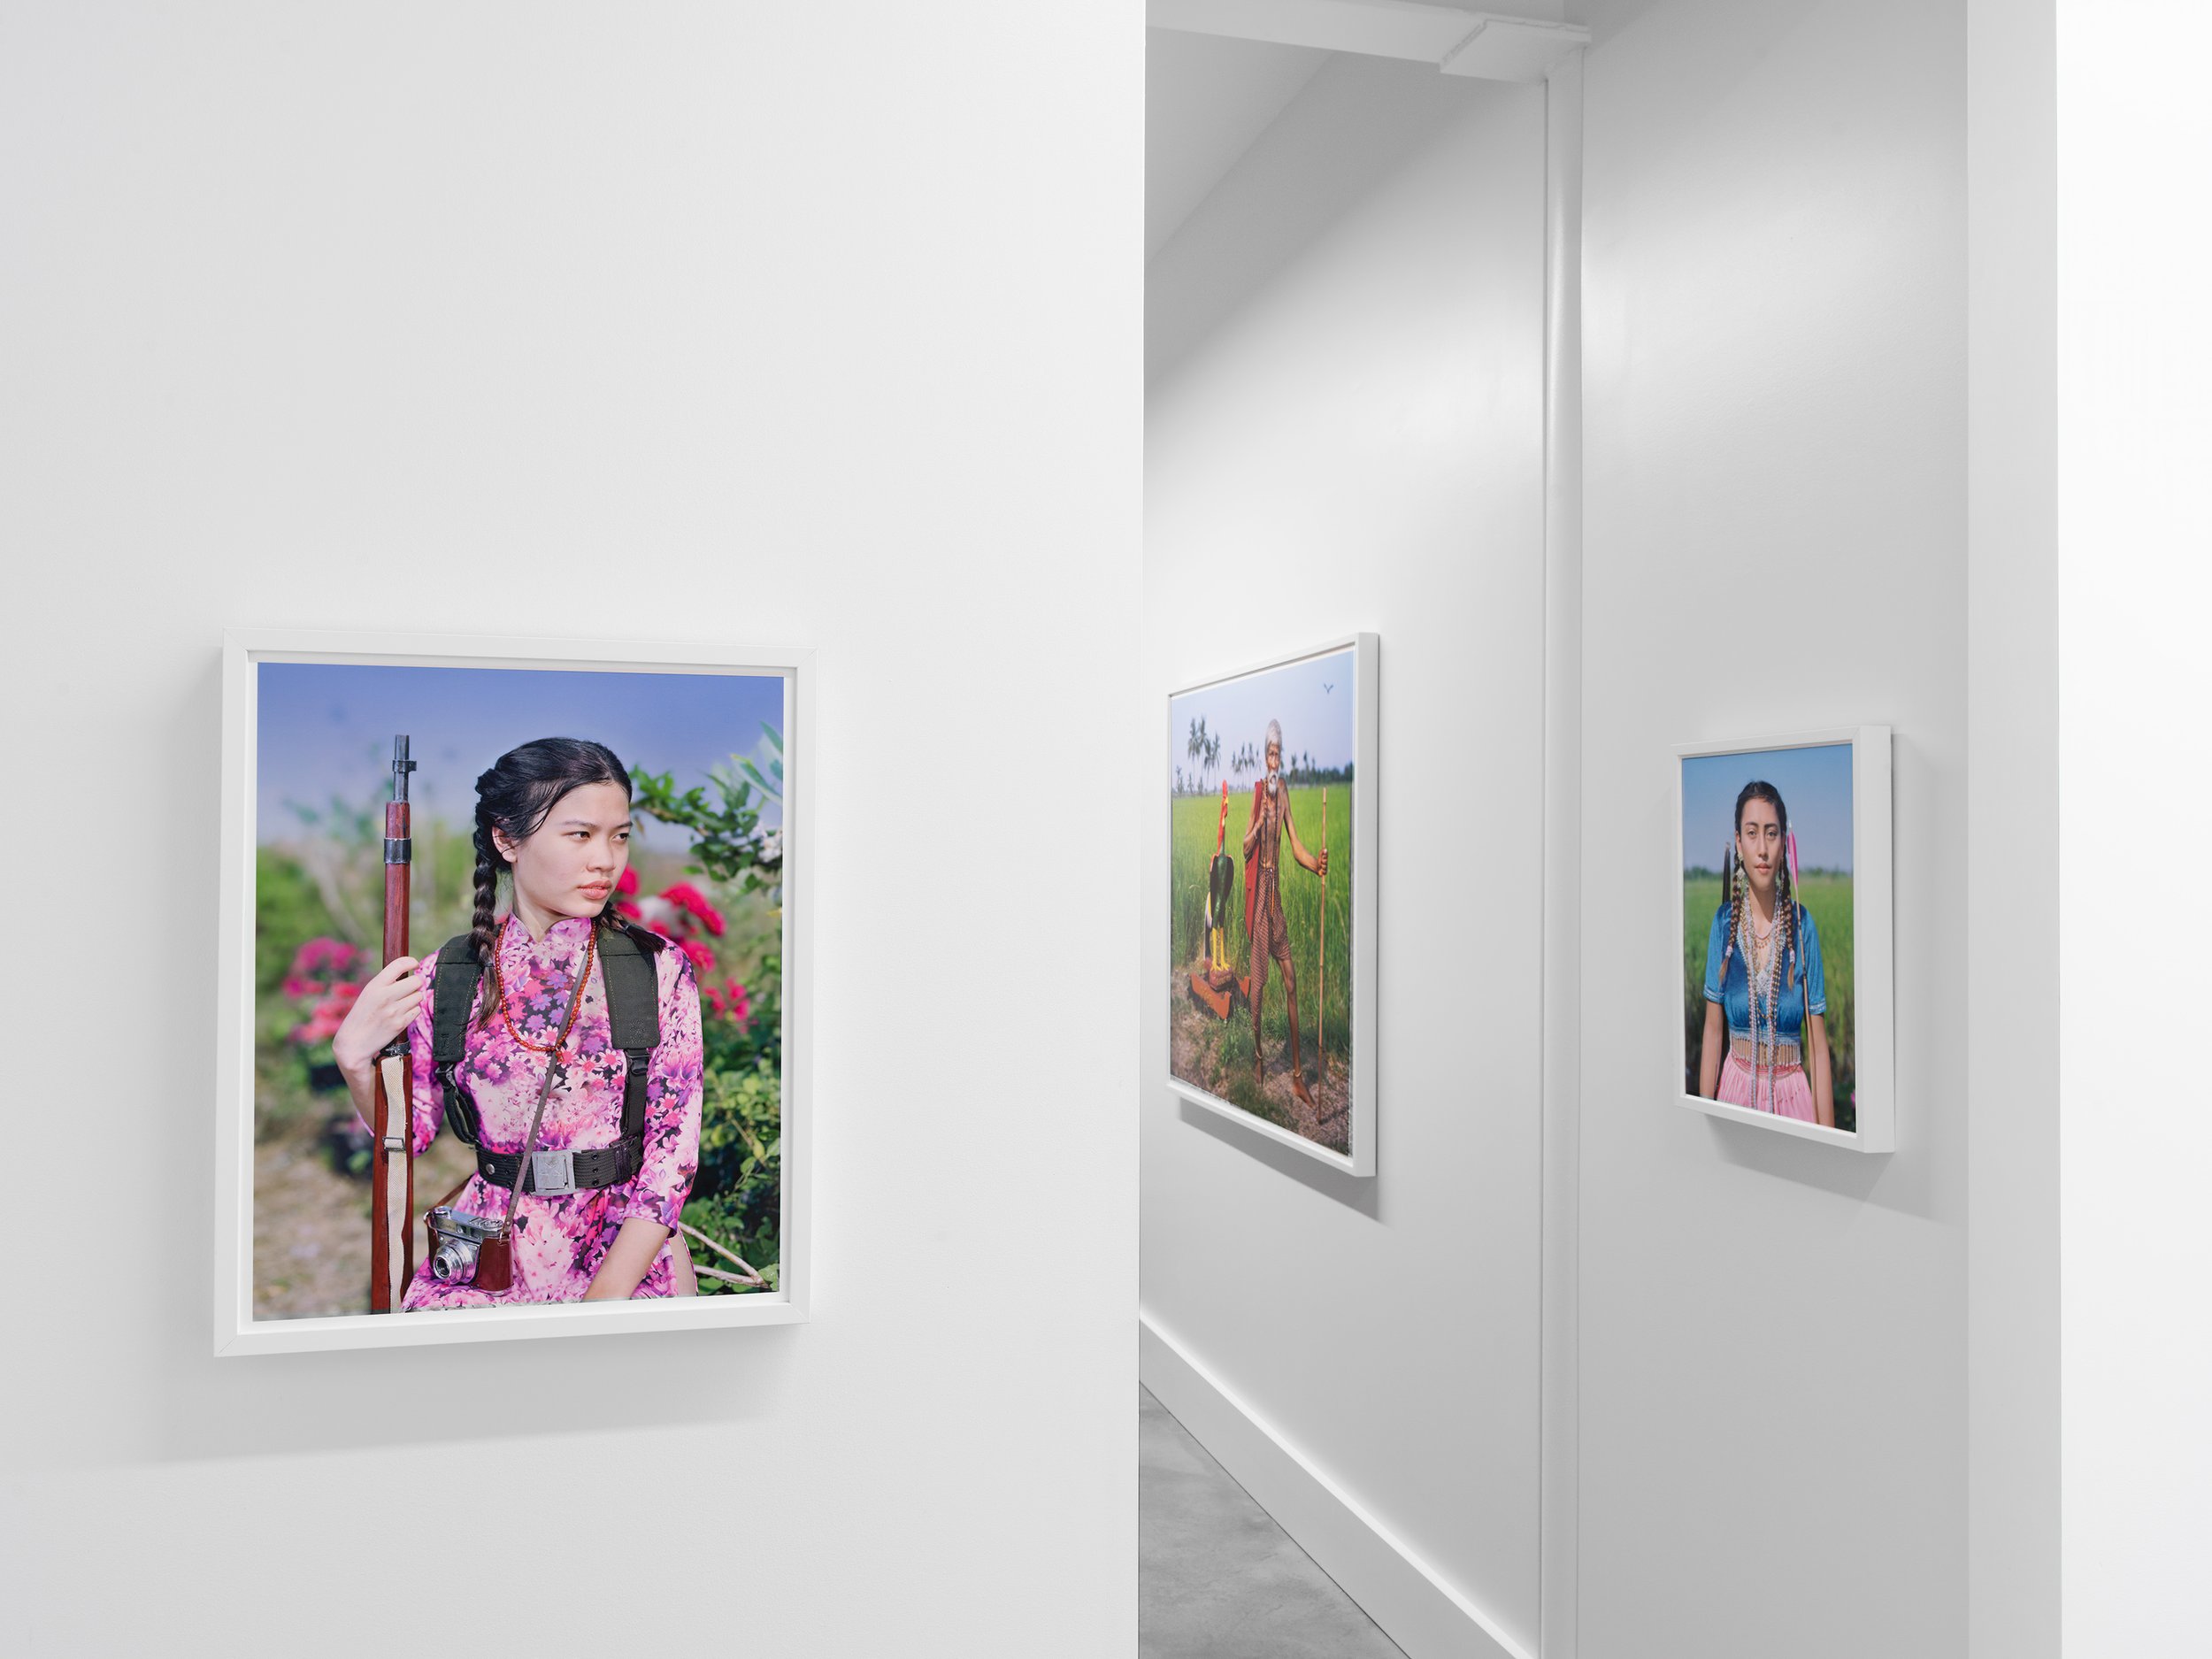  Installation view of Olivier Laude:   Chiến Thắng Ba Tơ left to right:  Sis{Loan}, Brother 4, &amp; Sis{teen}  